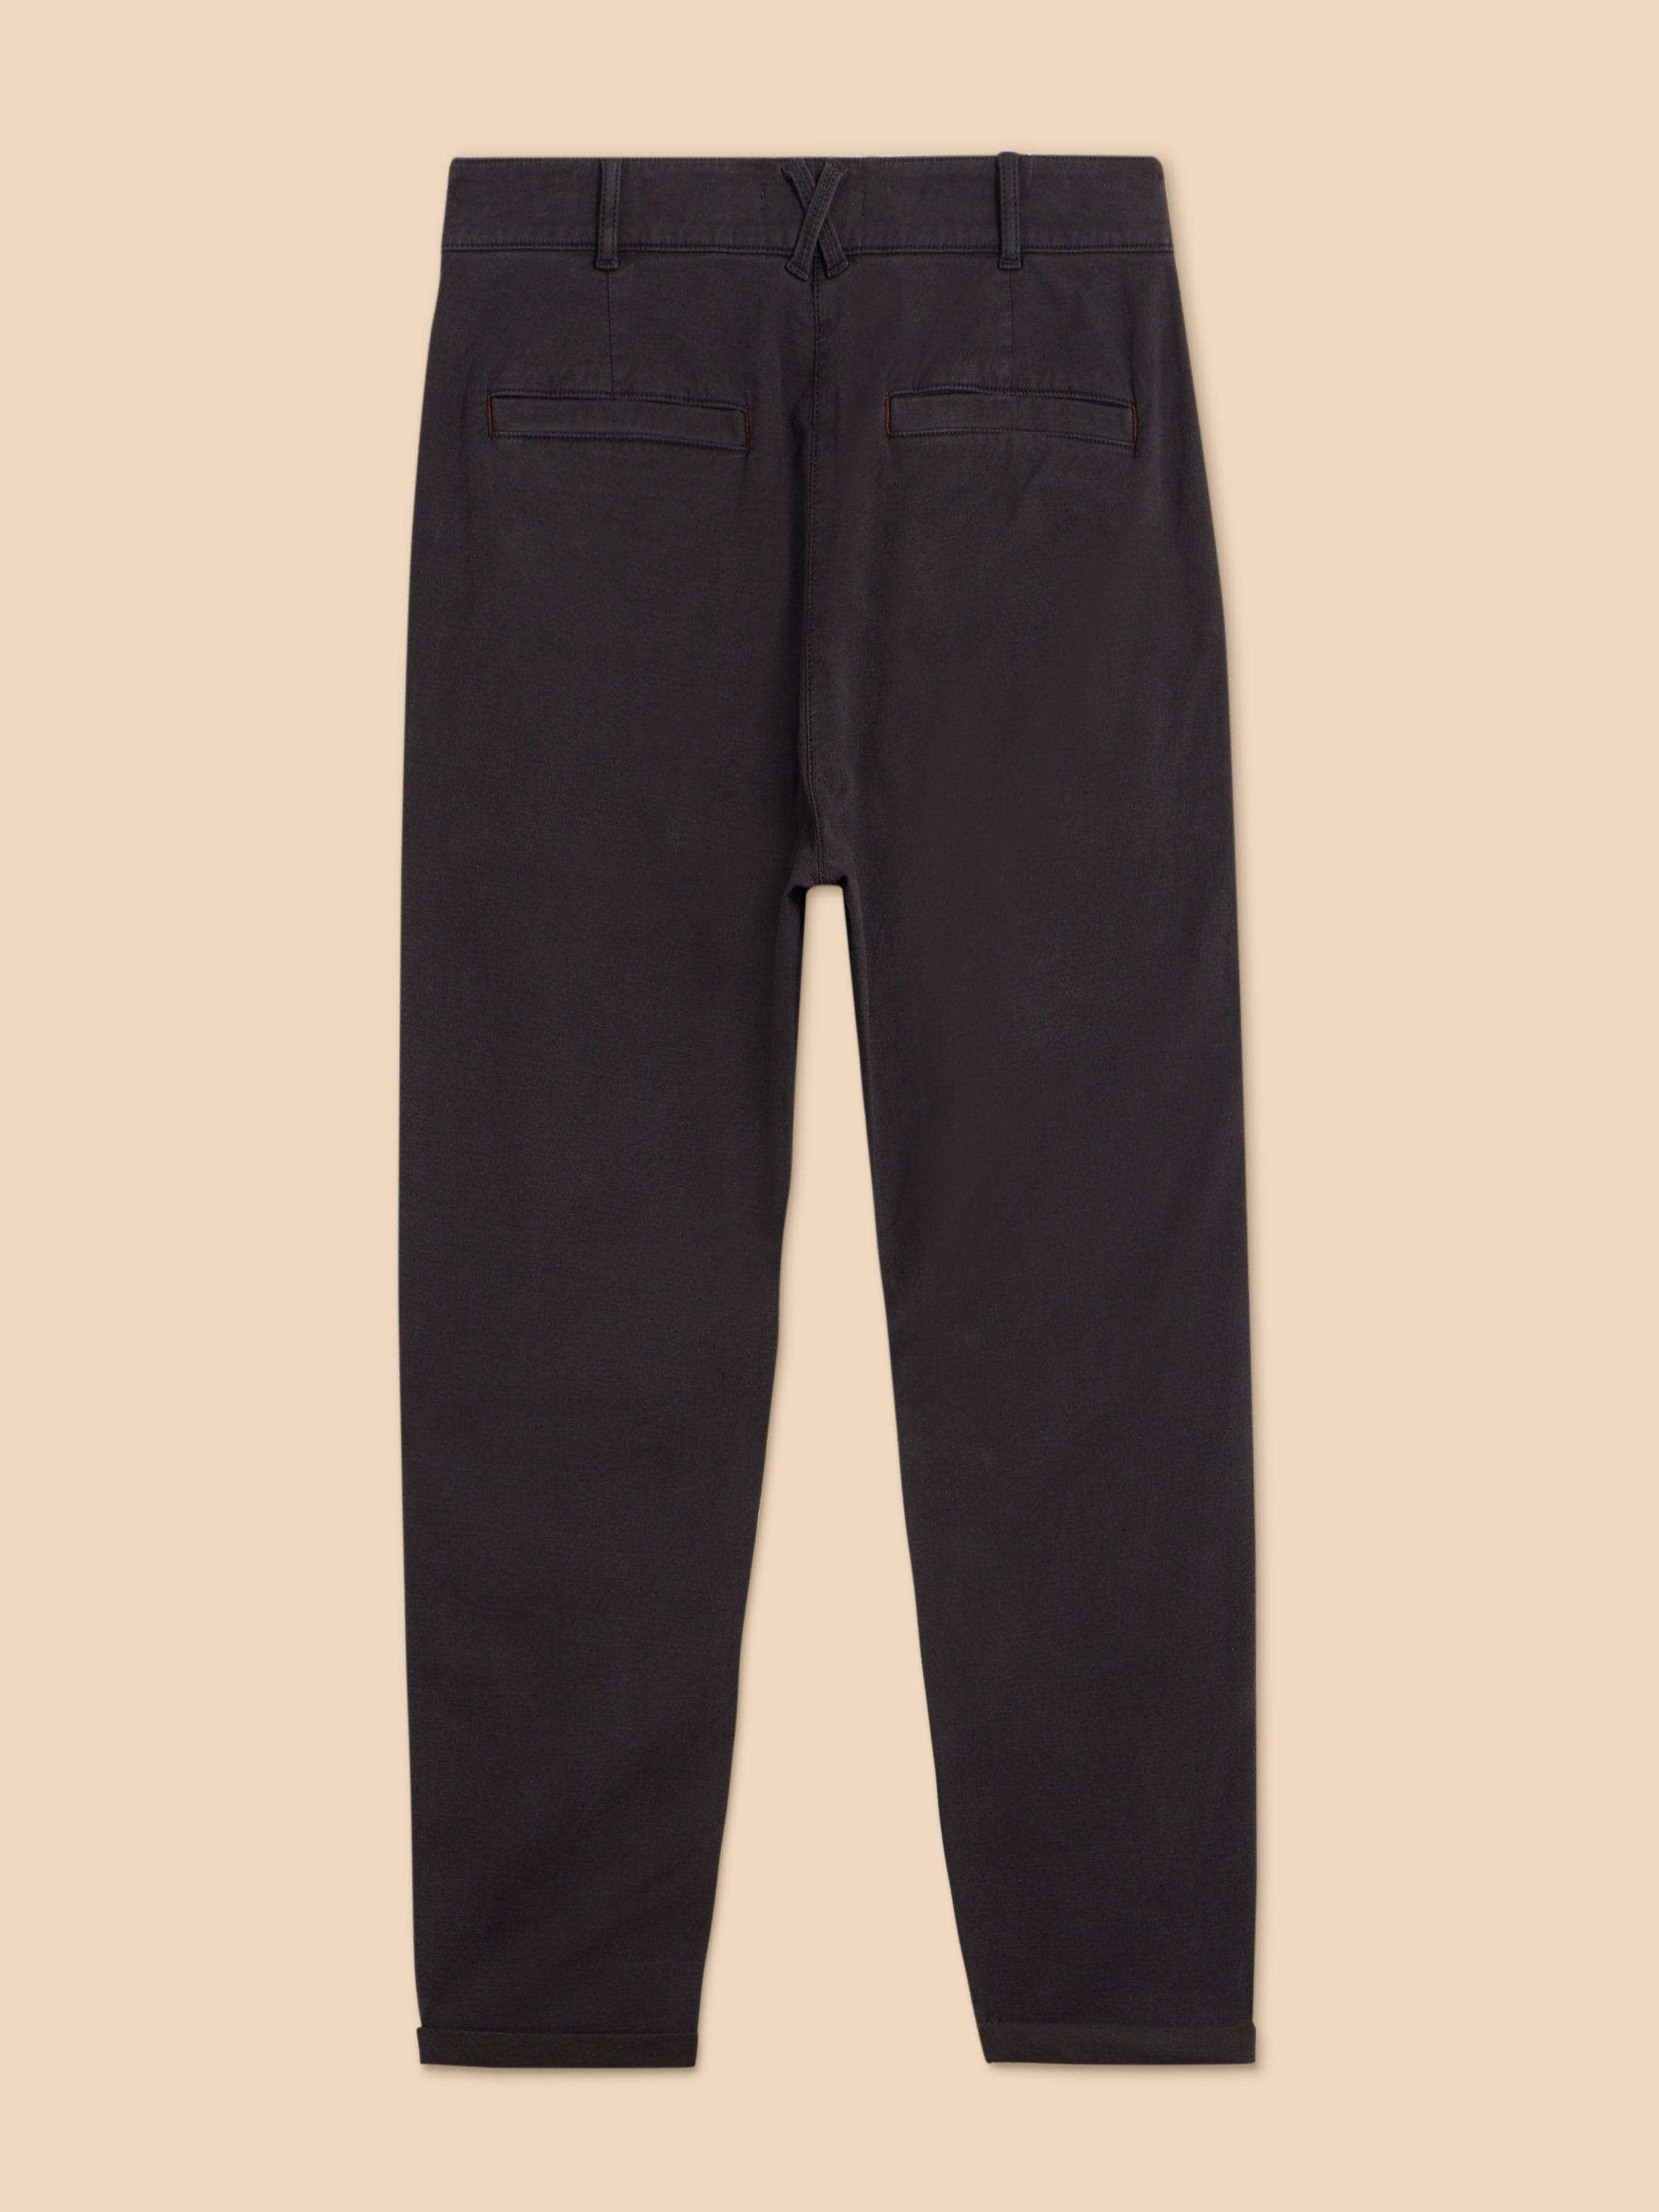 Twister Chino Trouser in PURE BLK - FLAT BACK